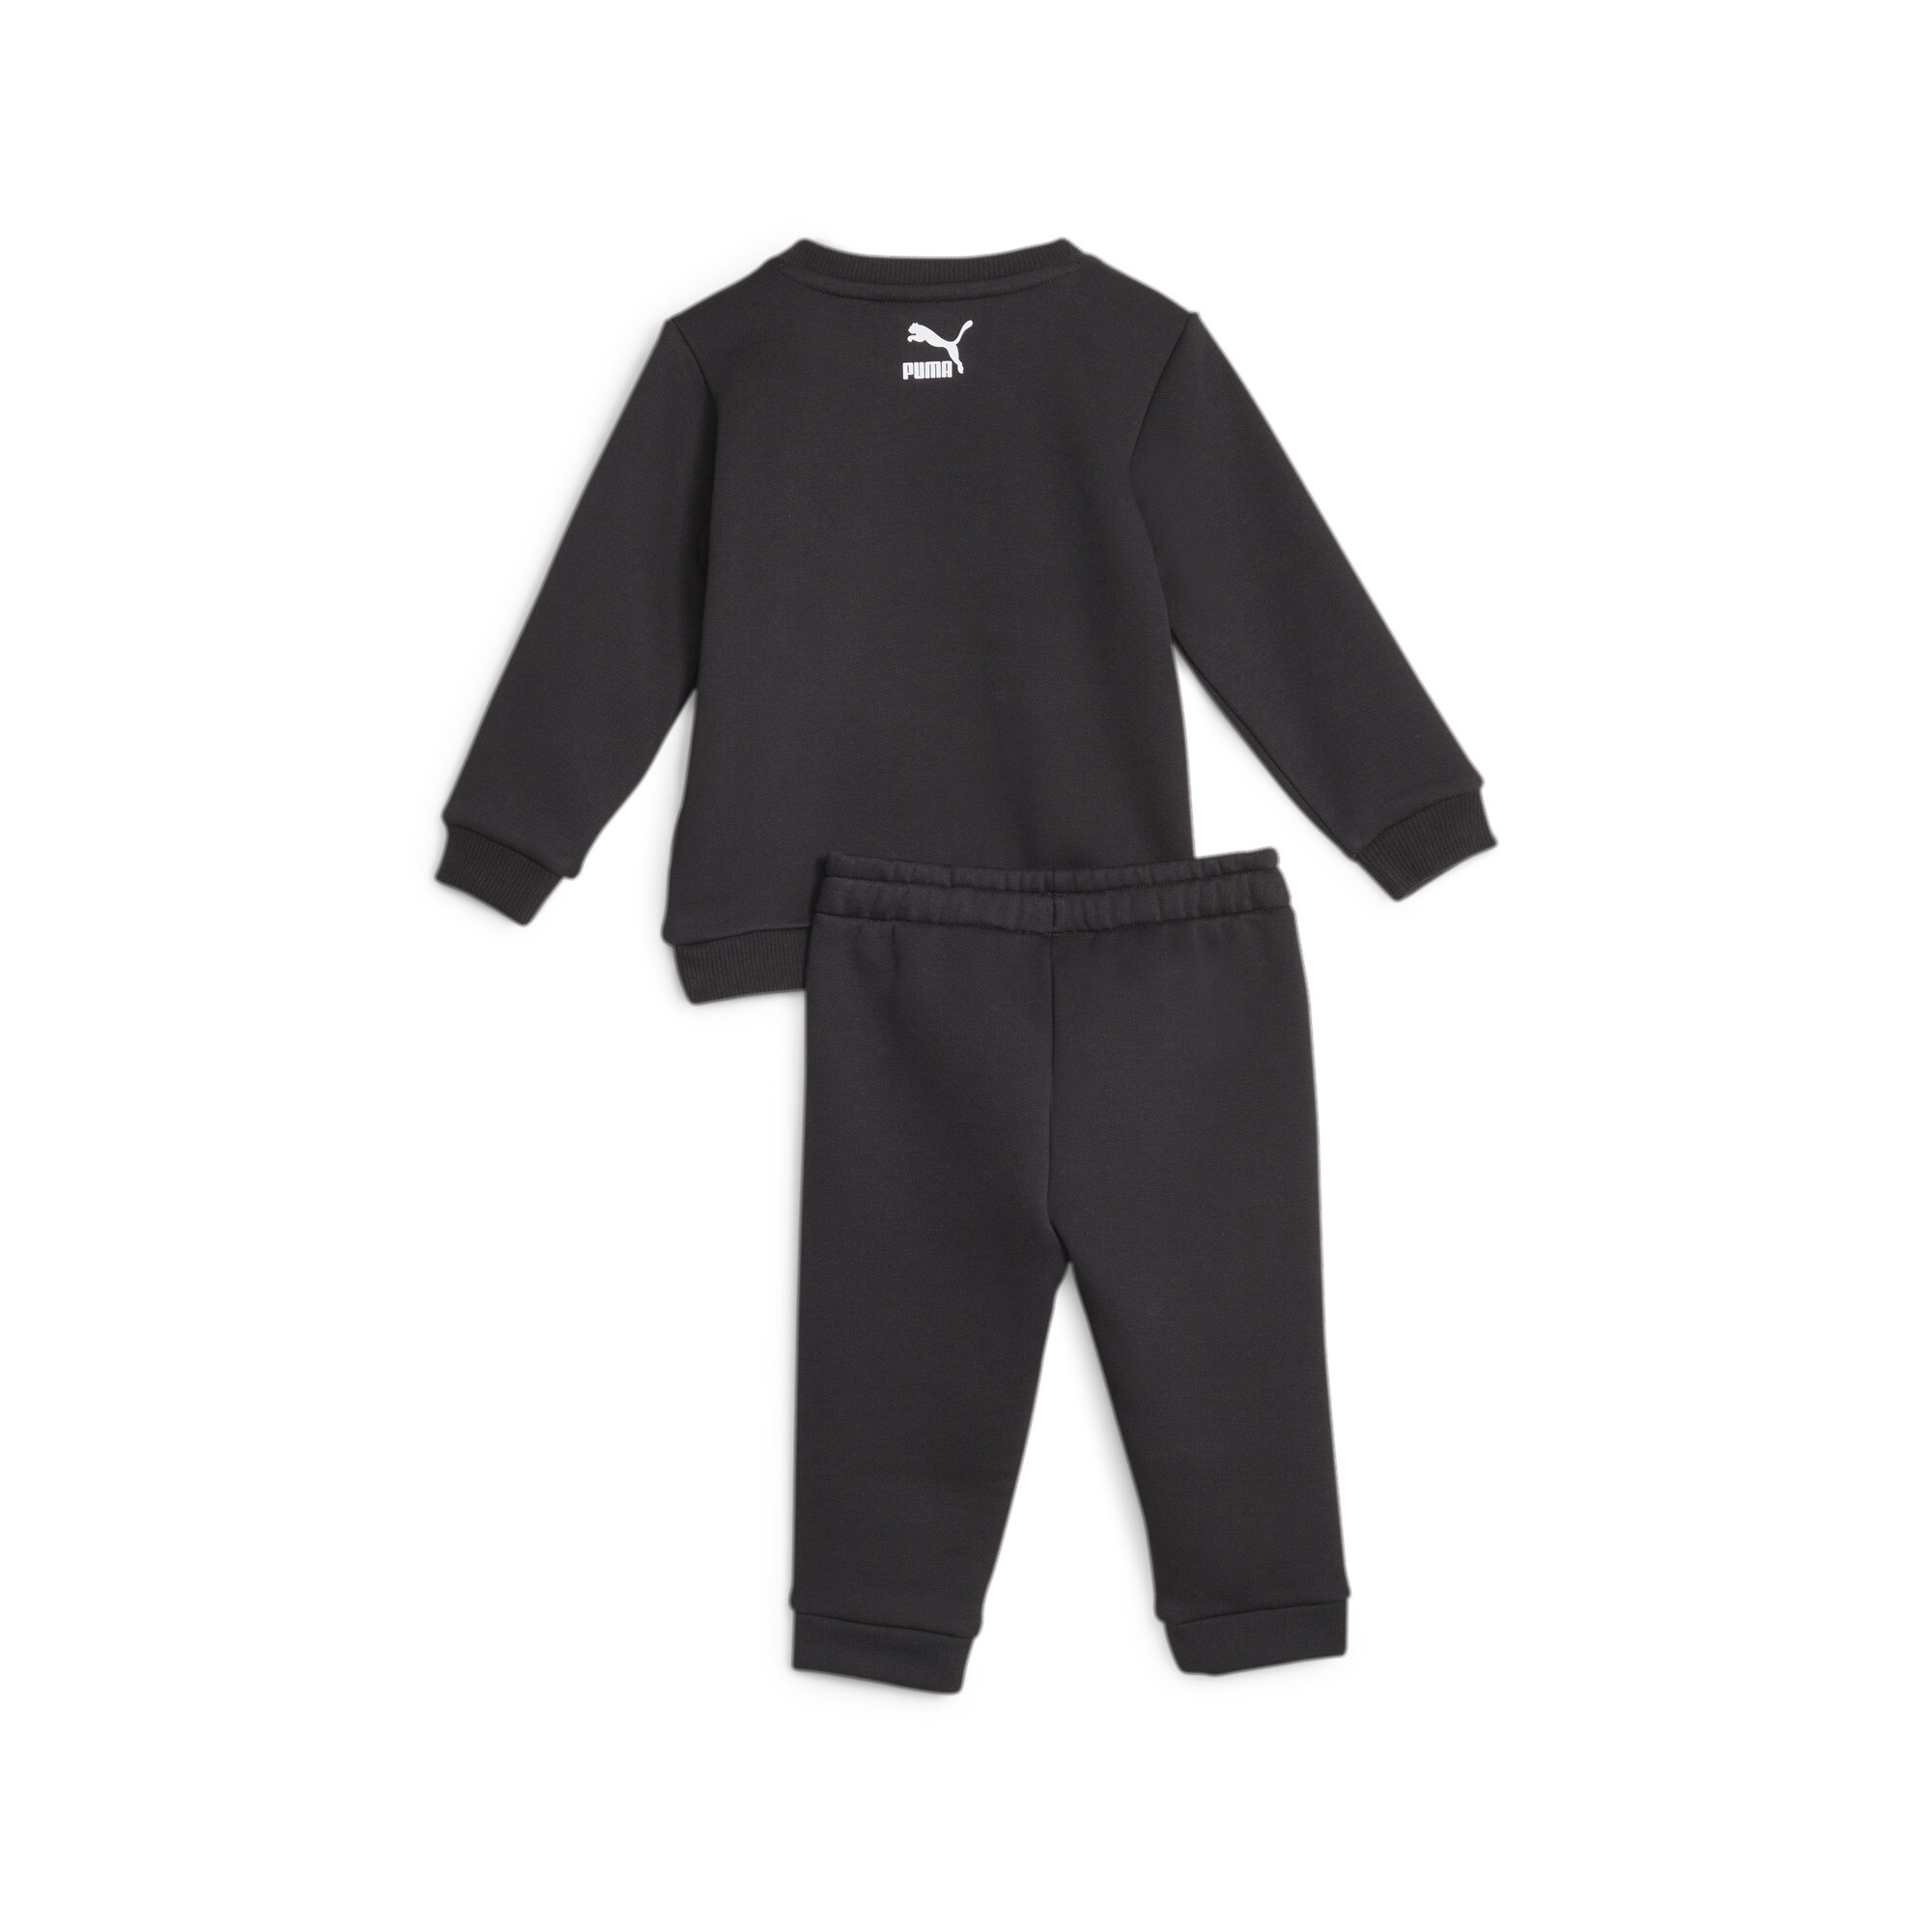 Kids' PUMA X MIRACULOUS Toddlers' Jogger In Black, Size 6-9 Months